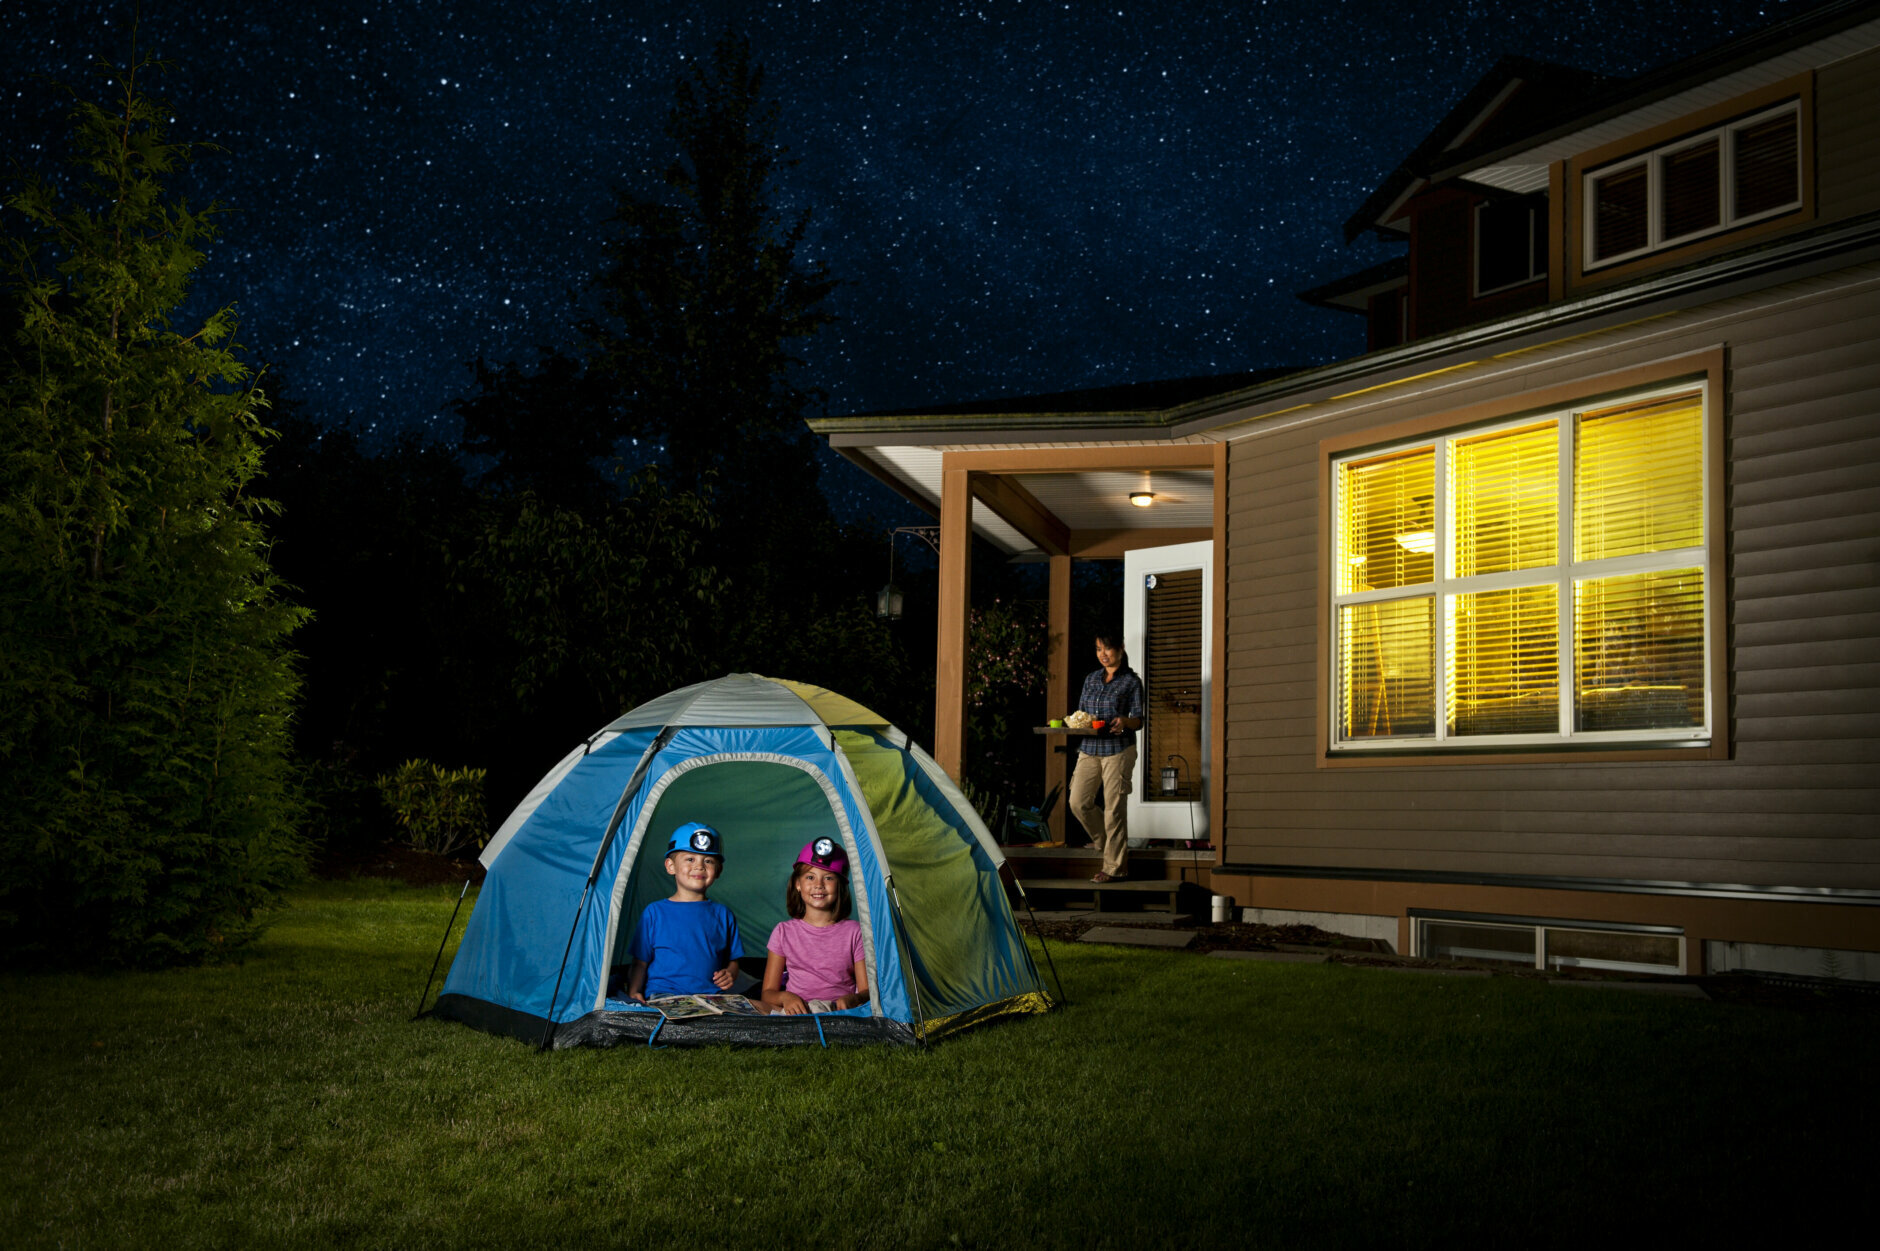 <p><span style="font-weight: 400;">You don’t have to miss your summer vacation just because you’re stuck at home. Pitch a tent in the backyard for the kids to enjoy the full camping experience!</span></p>
<p><span style="font-weight: 400;">Photo Credit: </span><a href="https://www.gettyimages.com/"><span style="font-weight: 400;">GettyImages</span></a><span style="font-weight: 400;">, </span><a href="https://www.gettyimages.com/detail/photo/children-camping-in-a-tent-in-the-backyard-royalty-free-image/153661913?adppopup=true"><span style="font-weight: 400;">RonTech2000</span></a></p>
